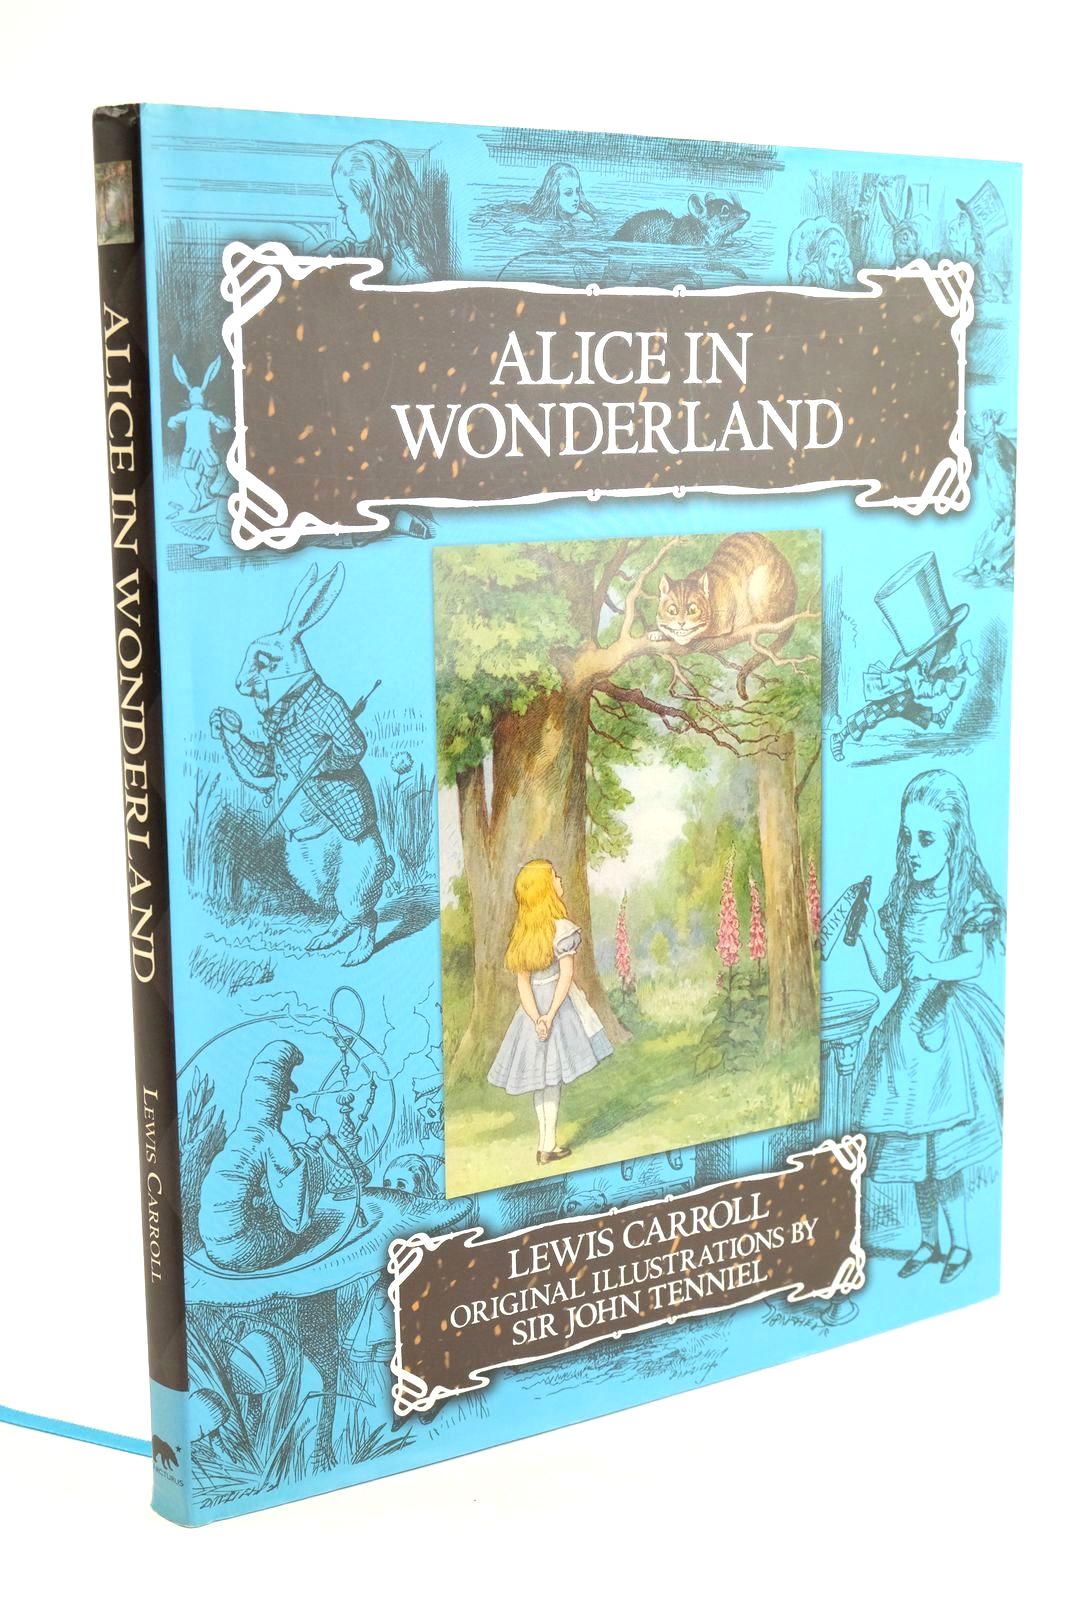 Photo of ALICE IN WONDERLAND written by Carroll, Lewis illustrated by Tenniel, John published by Arcturus Publishing Ltd. (STOCK CODE: 1323641)  for sale by Stella & Rose's Books